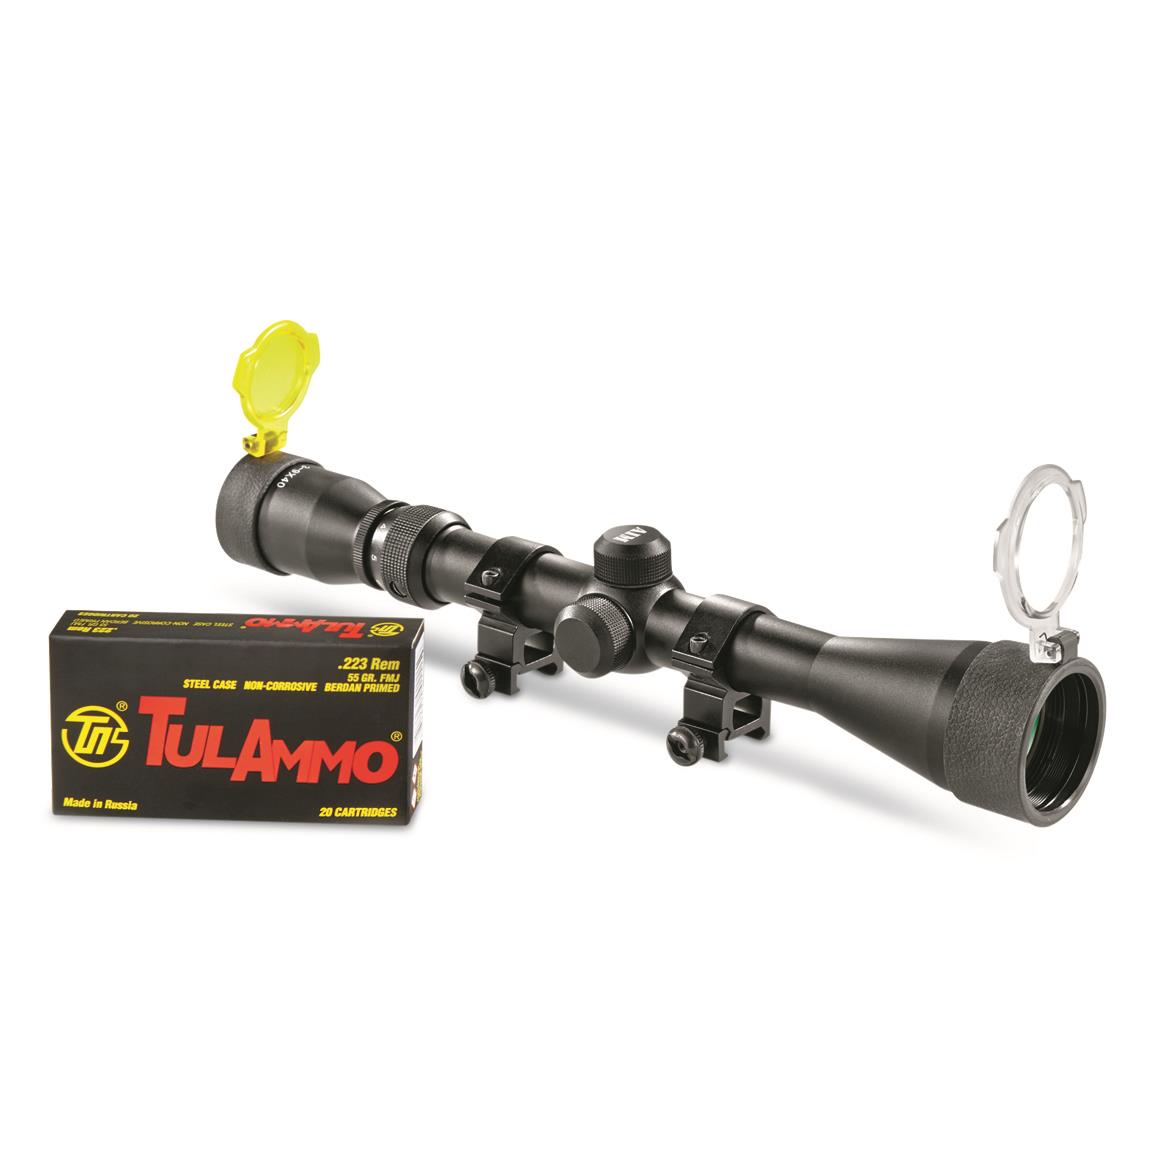 AimSports 3-9x40mm Rifle Scope and 100 Rounds of TulAmmo .223 Remington 55-gr. FMJ Ammo